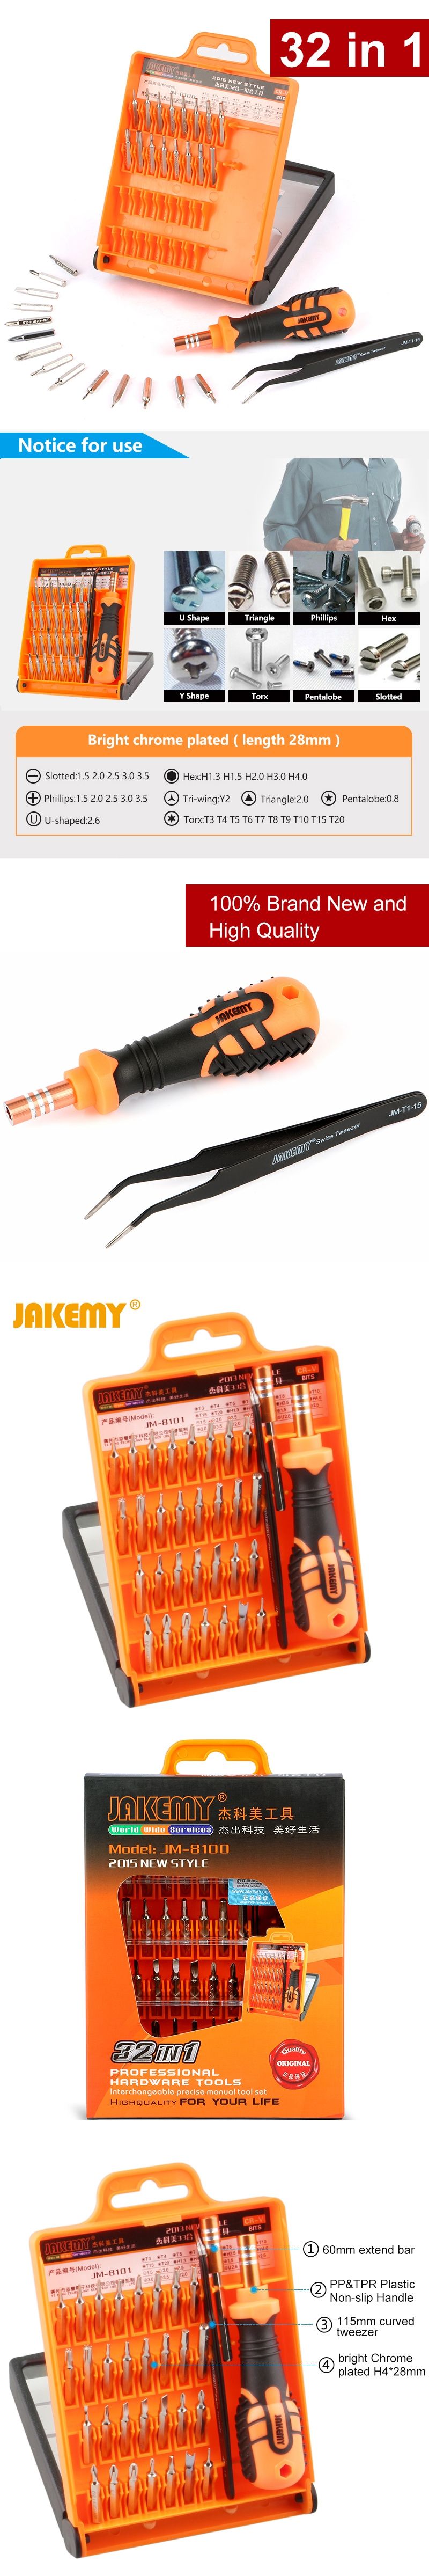 32 in1 Multifunctional Precision Screwdriver Set For iPhone Laptop ...